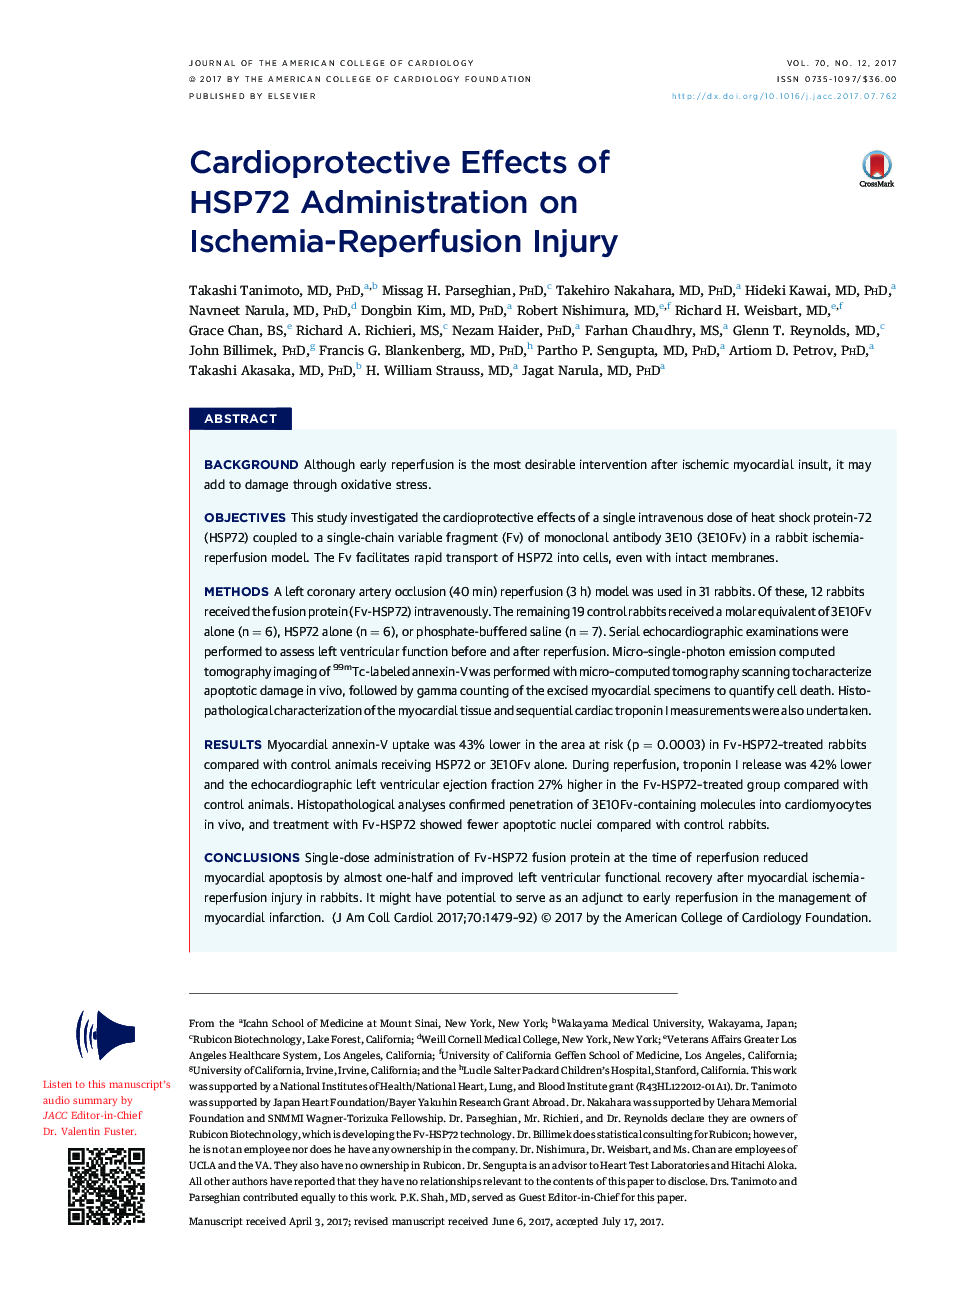 Cardioprotective Effects of HSP72Â Administration on Ischemia-Reperfusion Injury